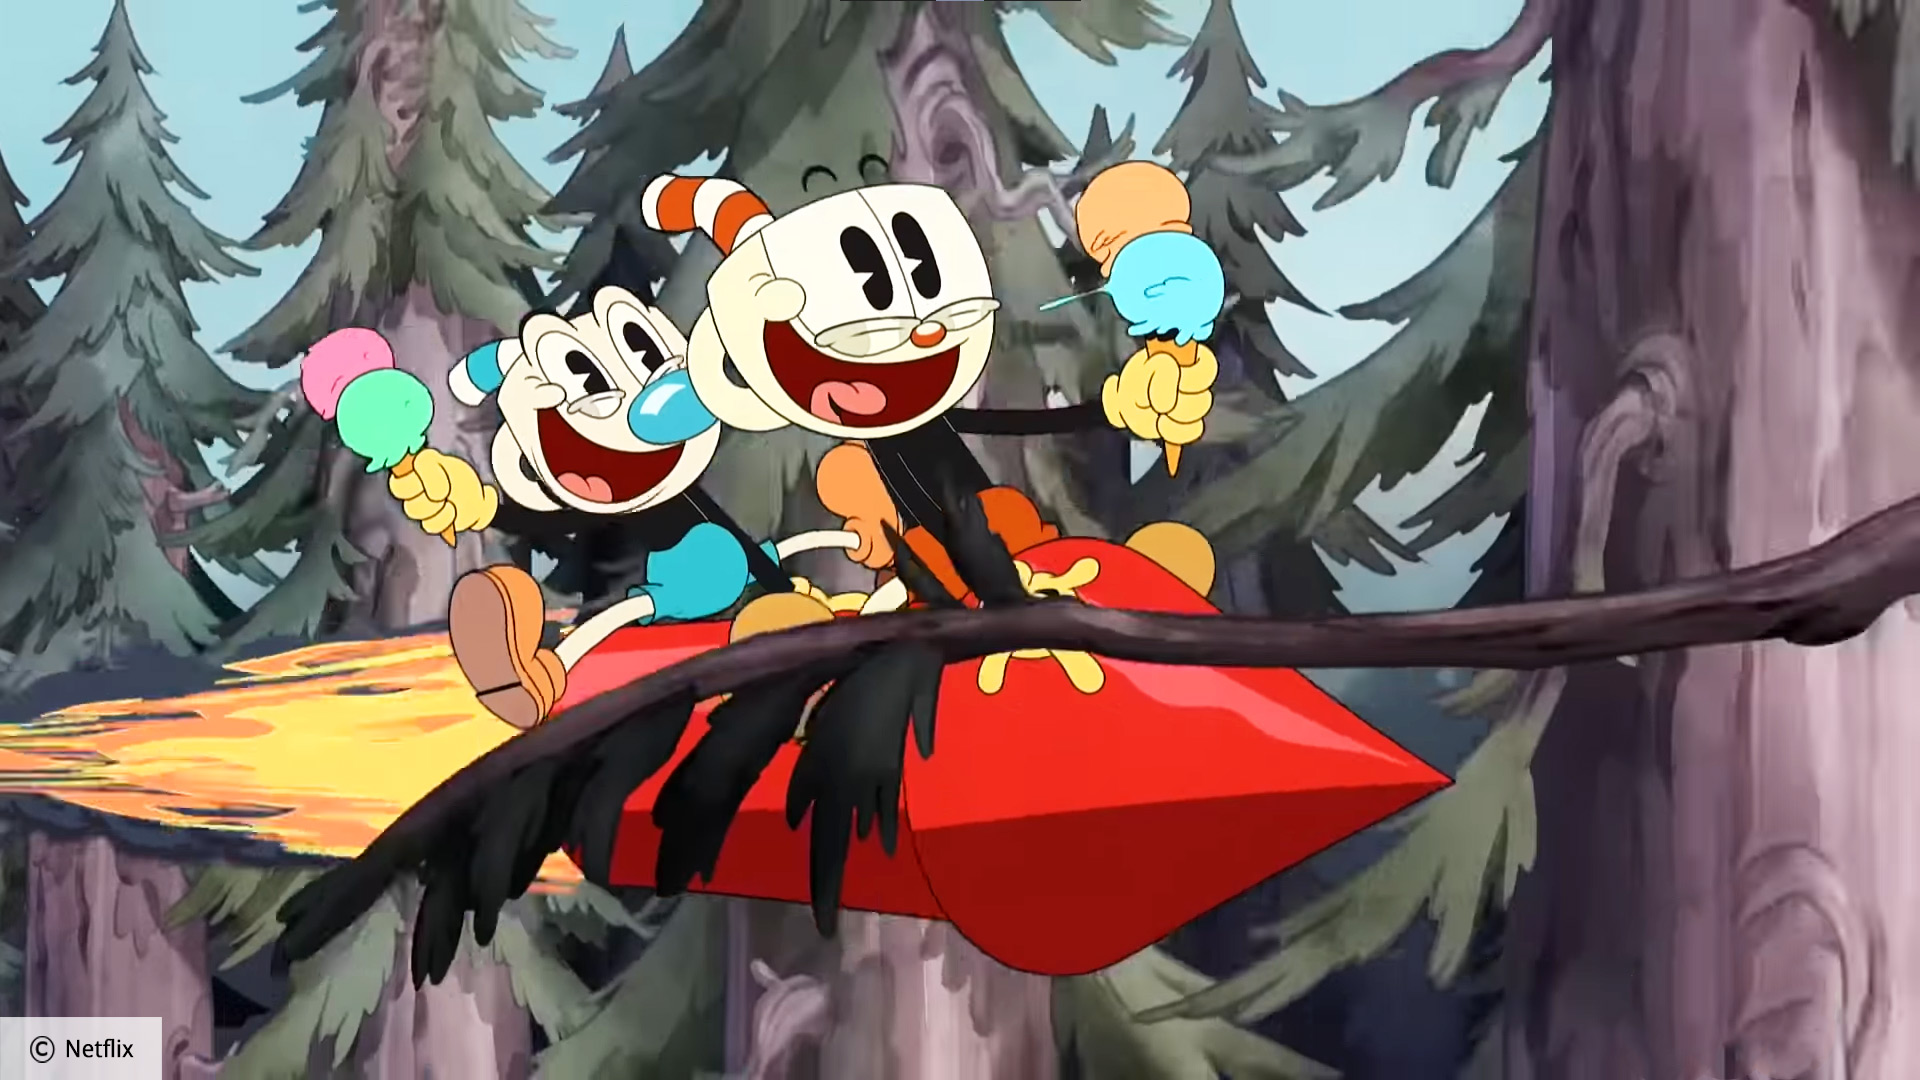 The Cuphead Show! gets a brand new trailer ahead of February release